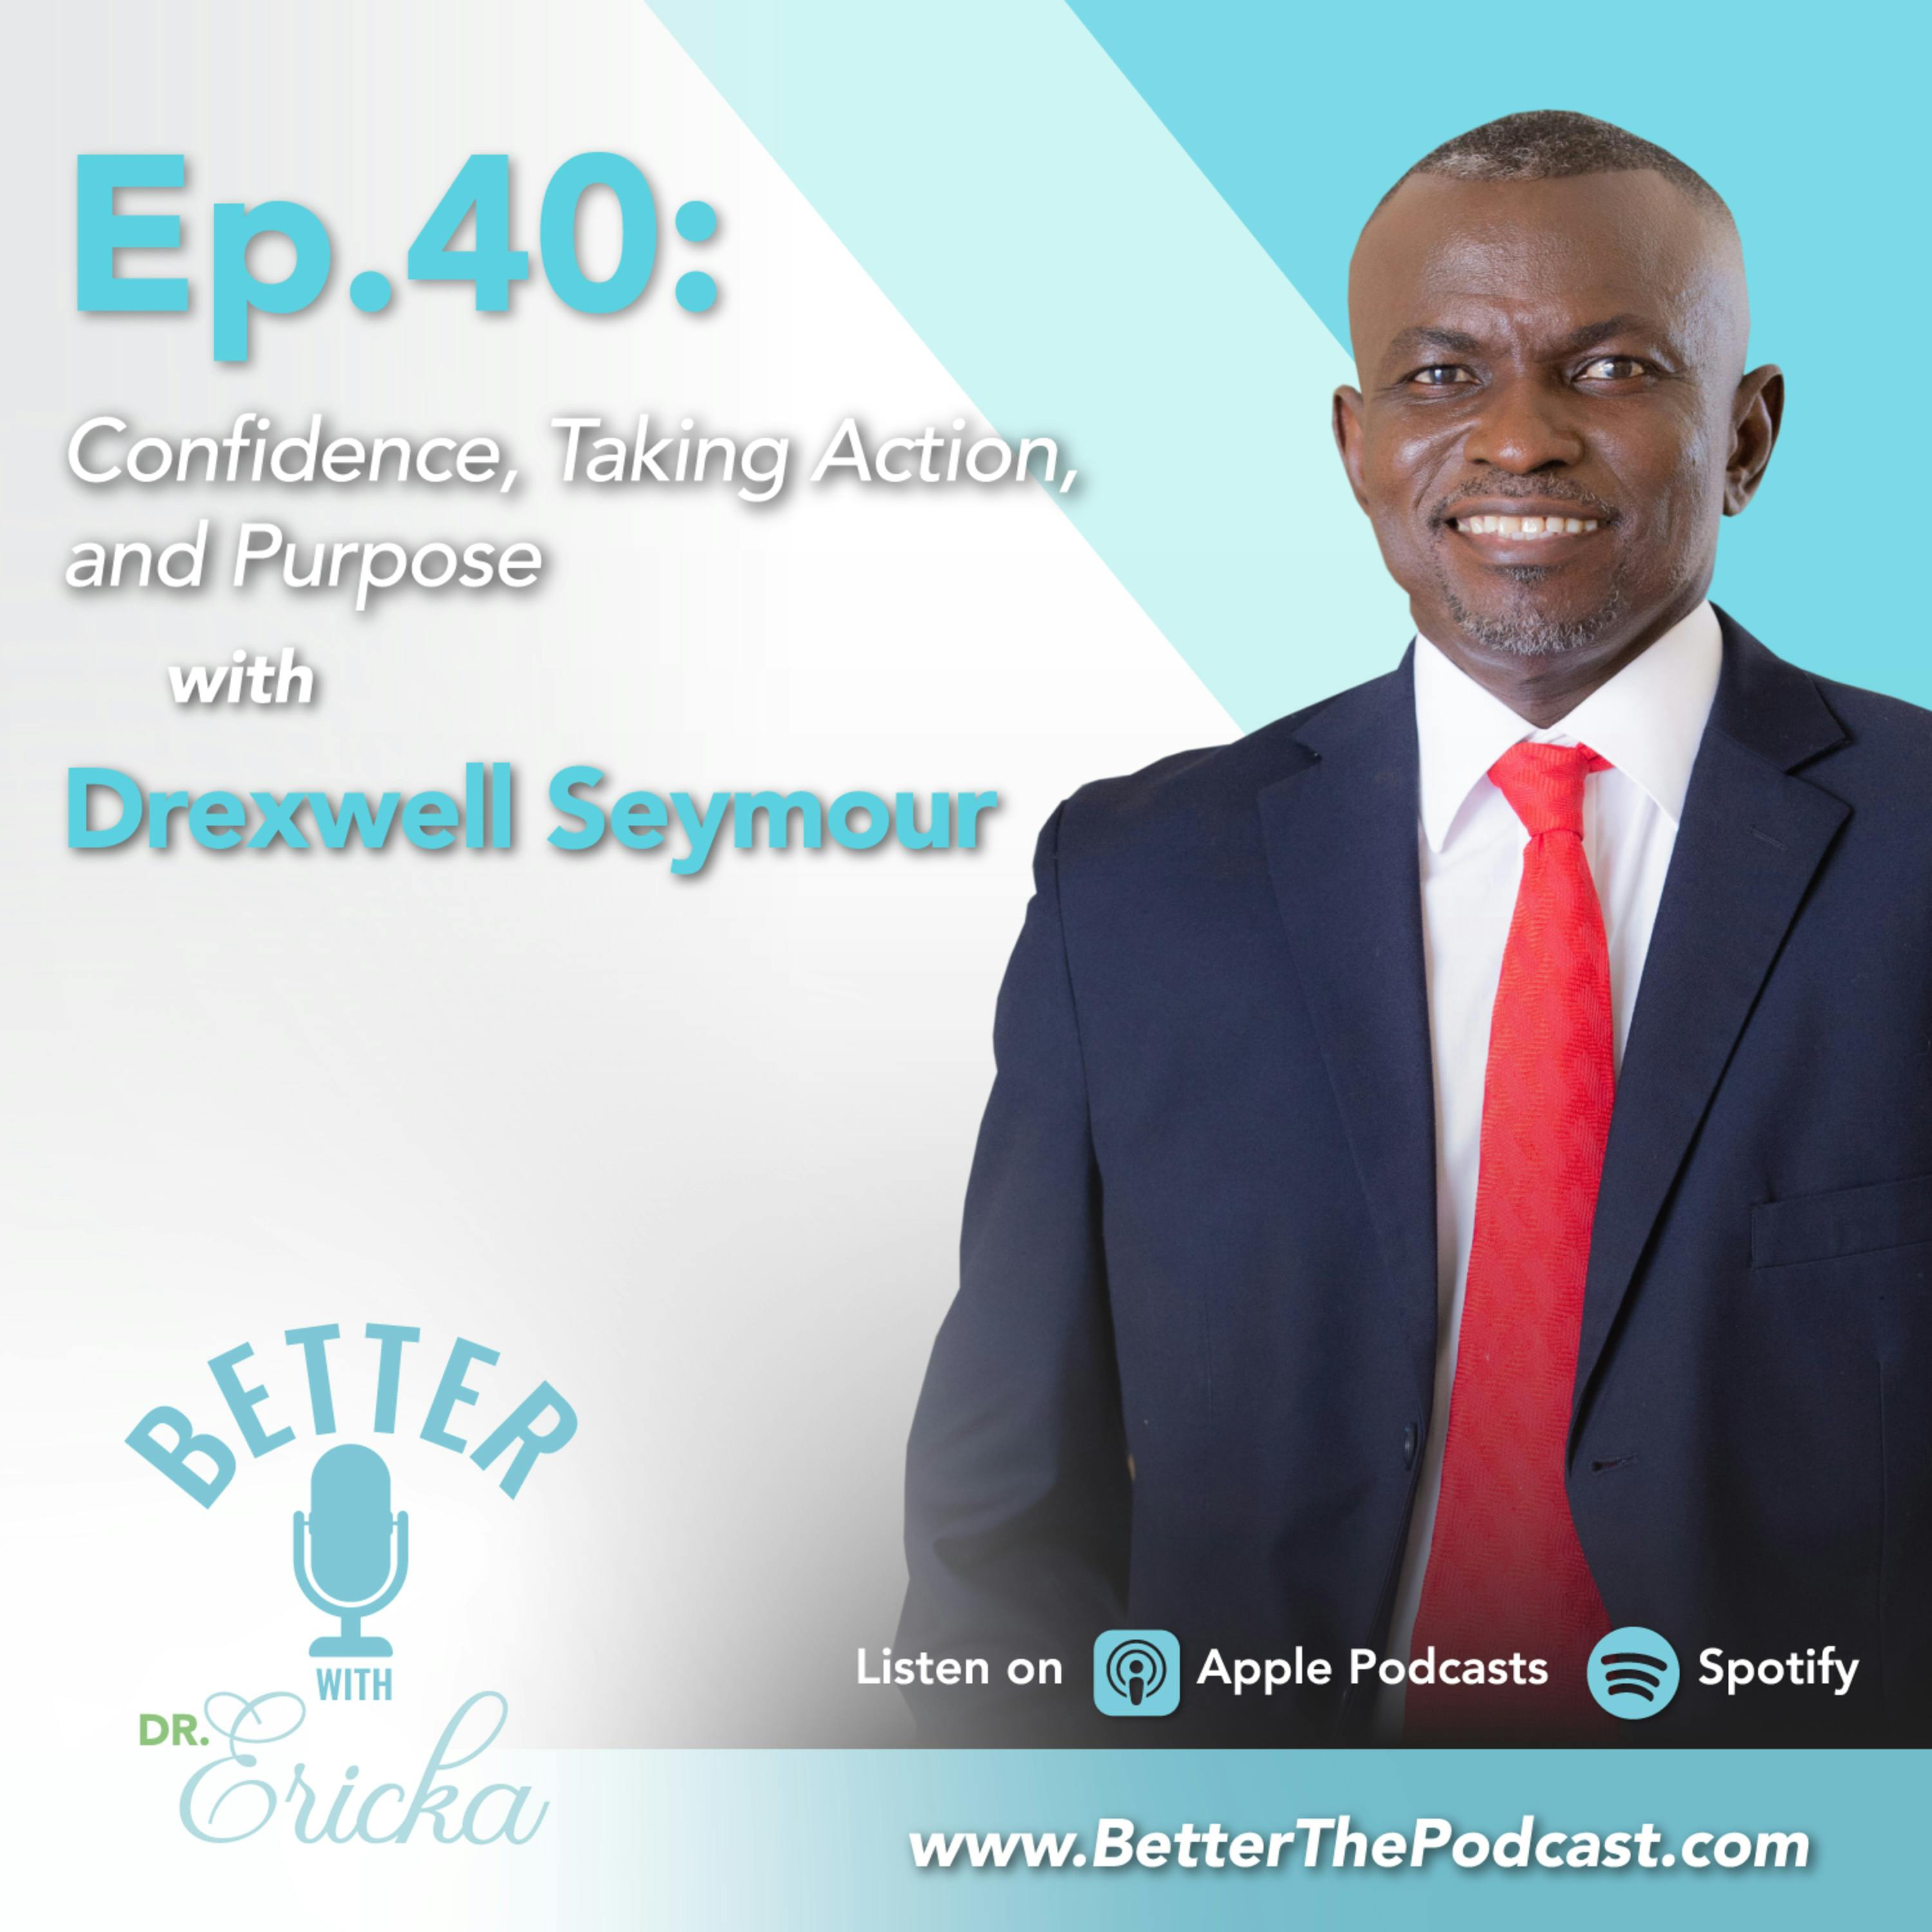 Confidence, Taking Action, and Purpose with Drexwell Seymour